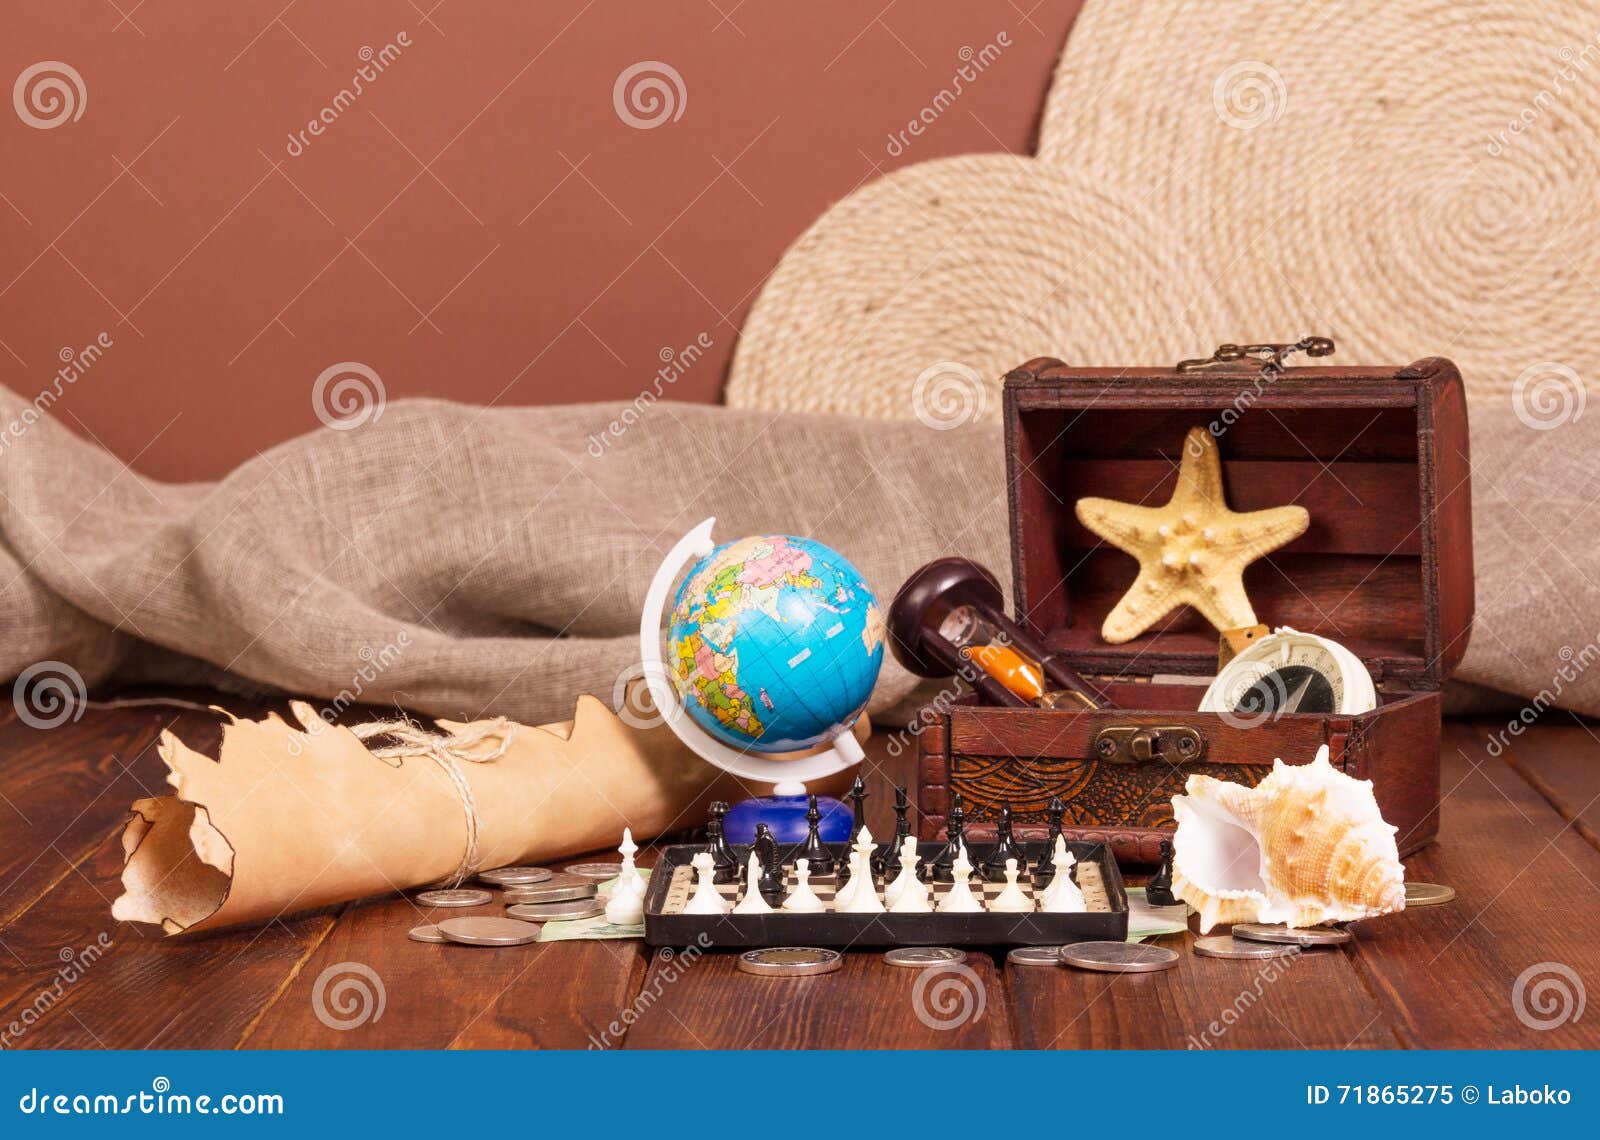 Compass chess stock image. Image of competition, planning - 18222101